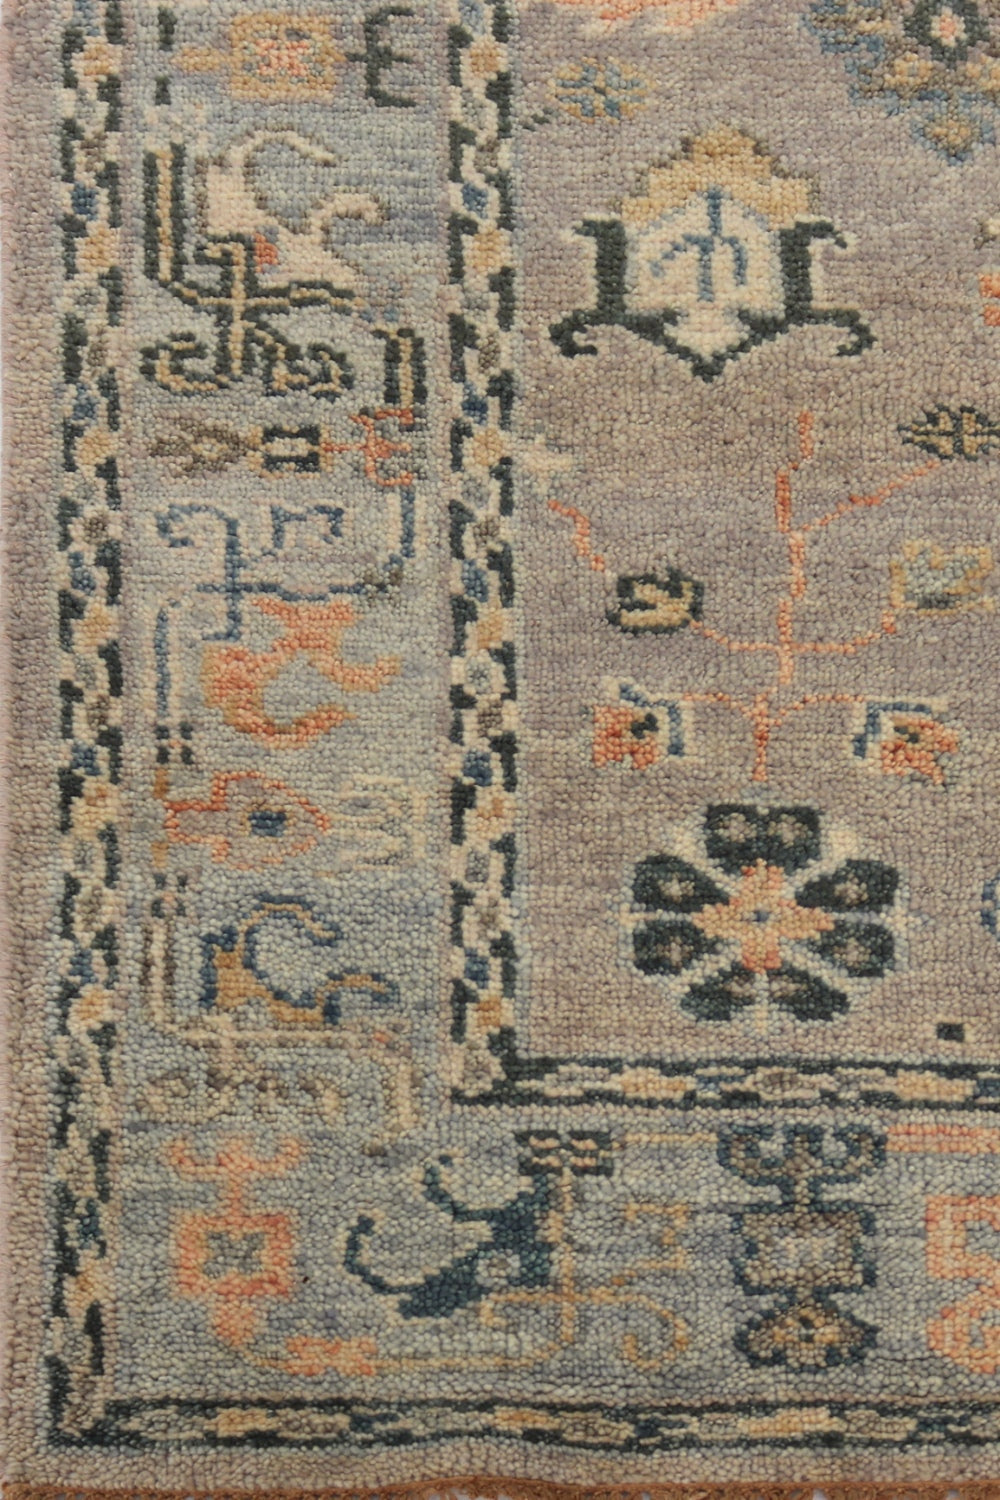 Sultanabad 4 Handwoven Traditional Rug, J71708